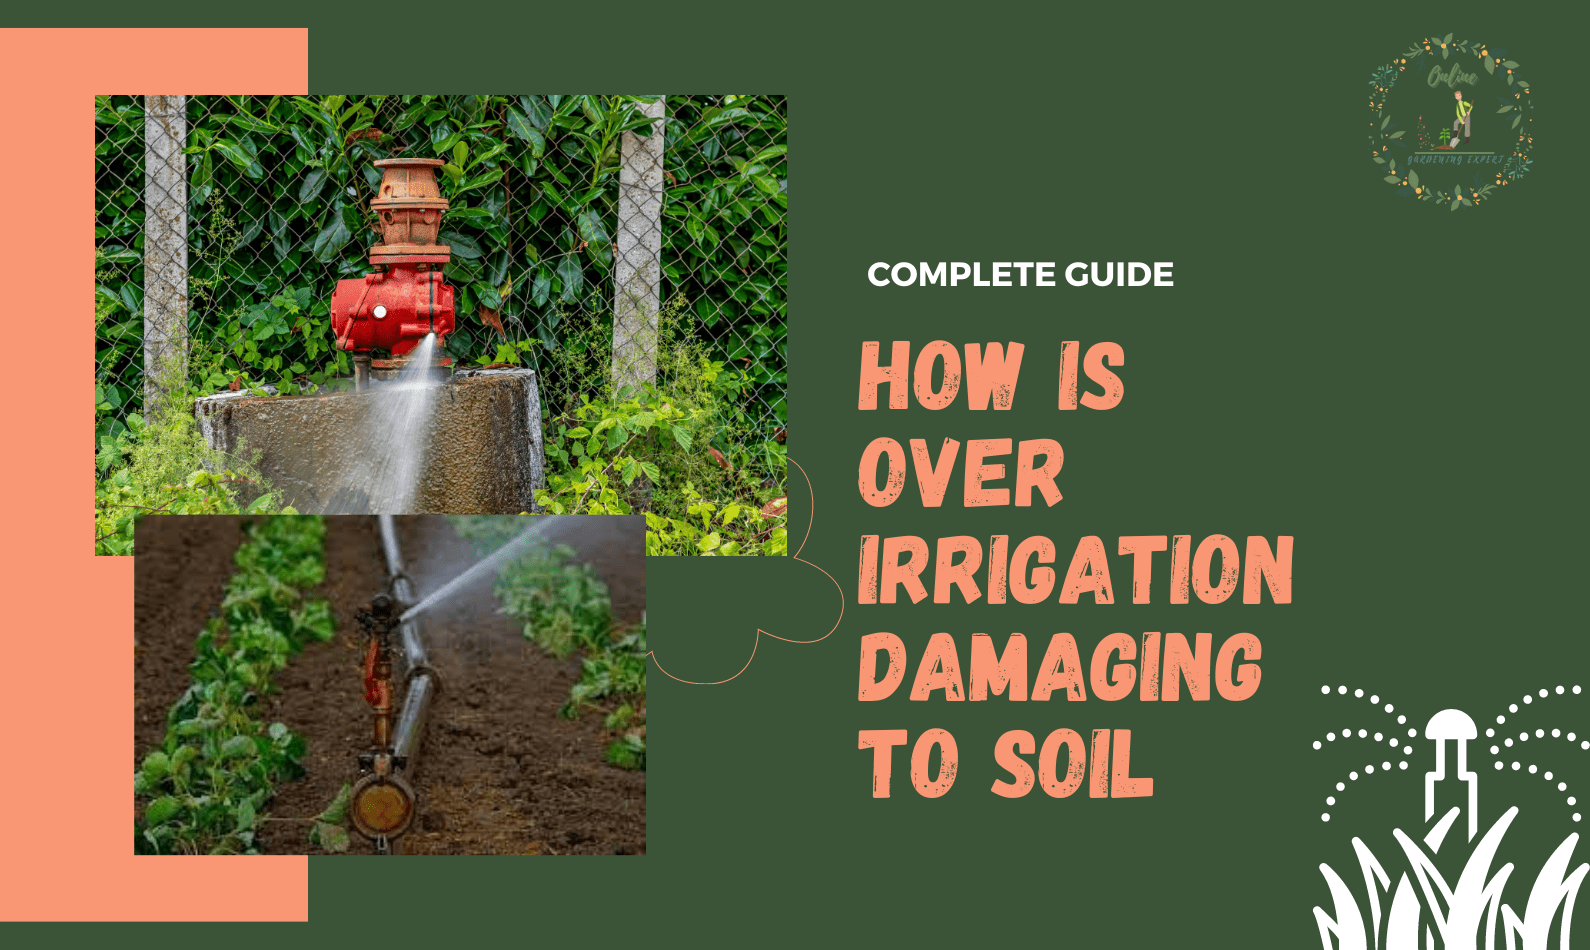 How is Over Irrigation Damaging to Soil